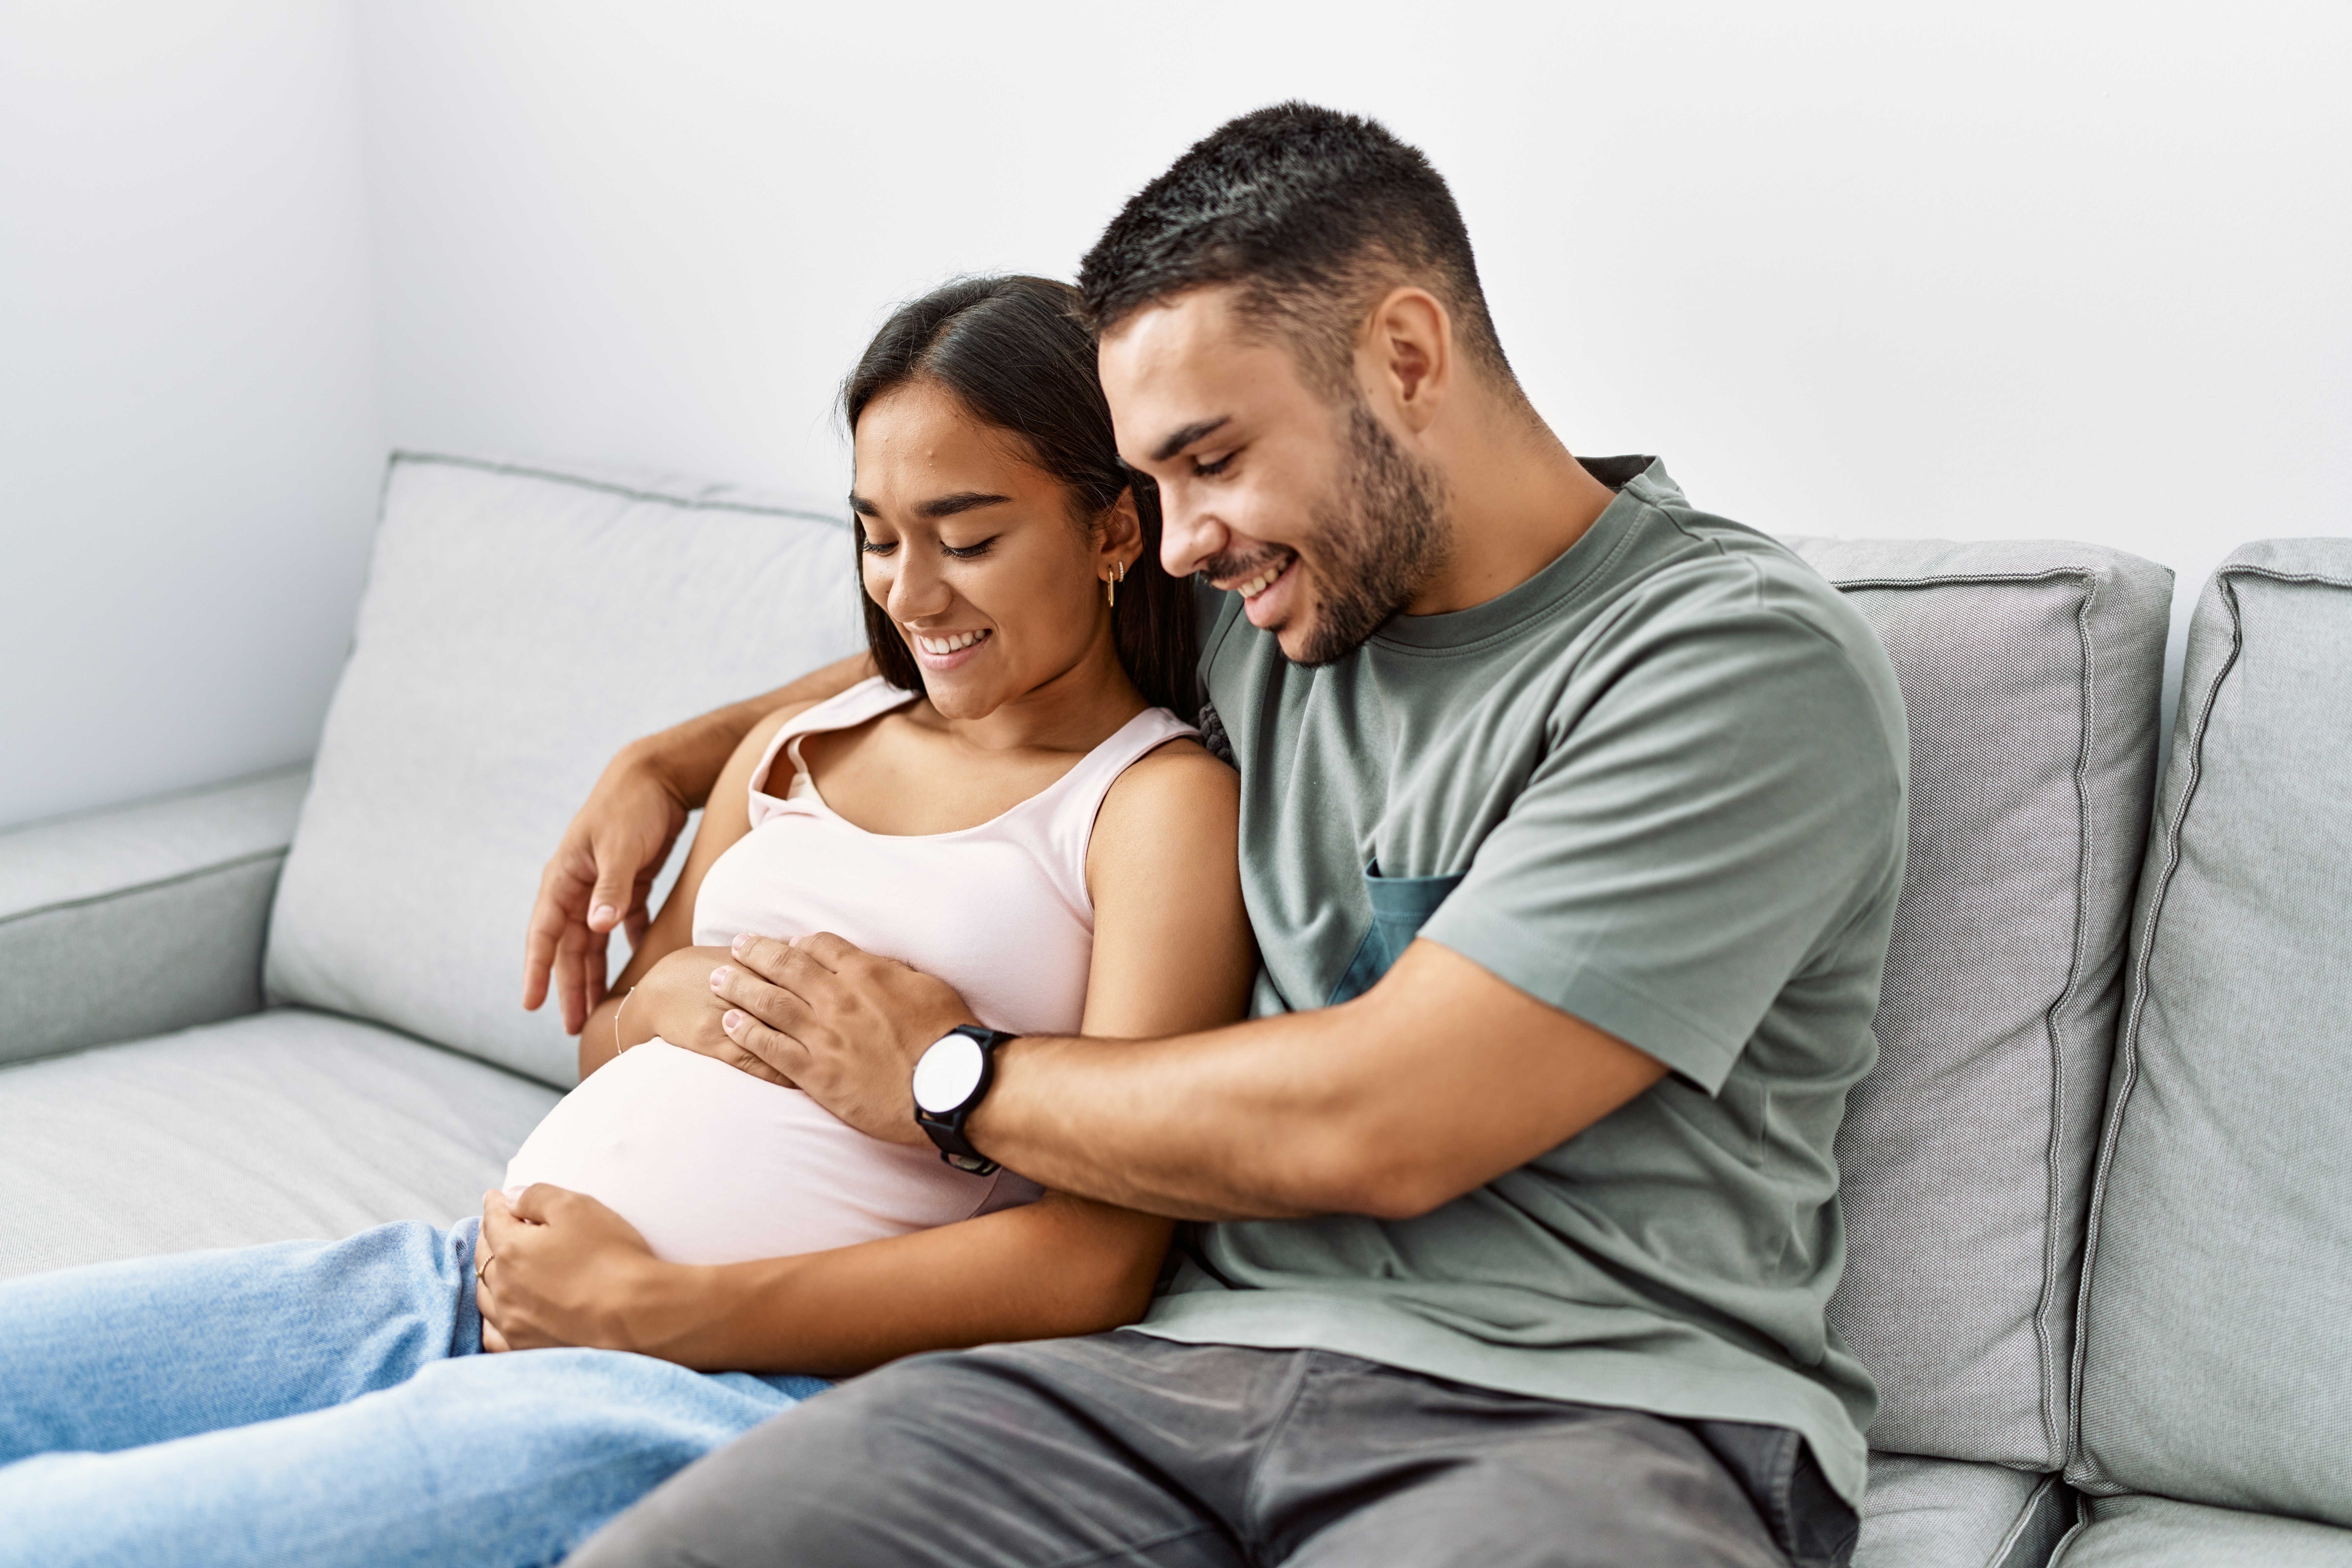 Why Do Some Pregnant Women Type as Both Rh Positive & Rh Negative?